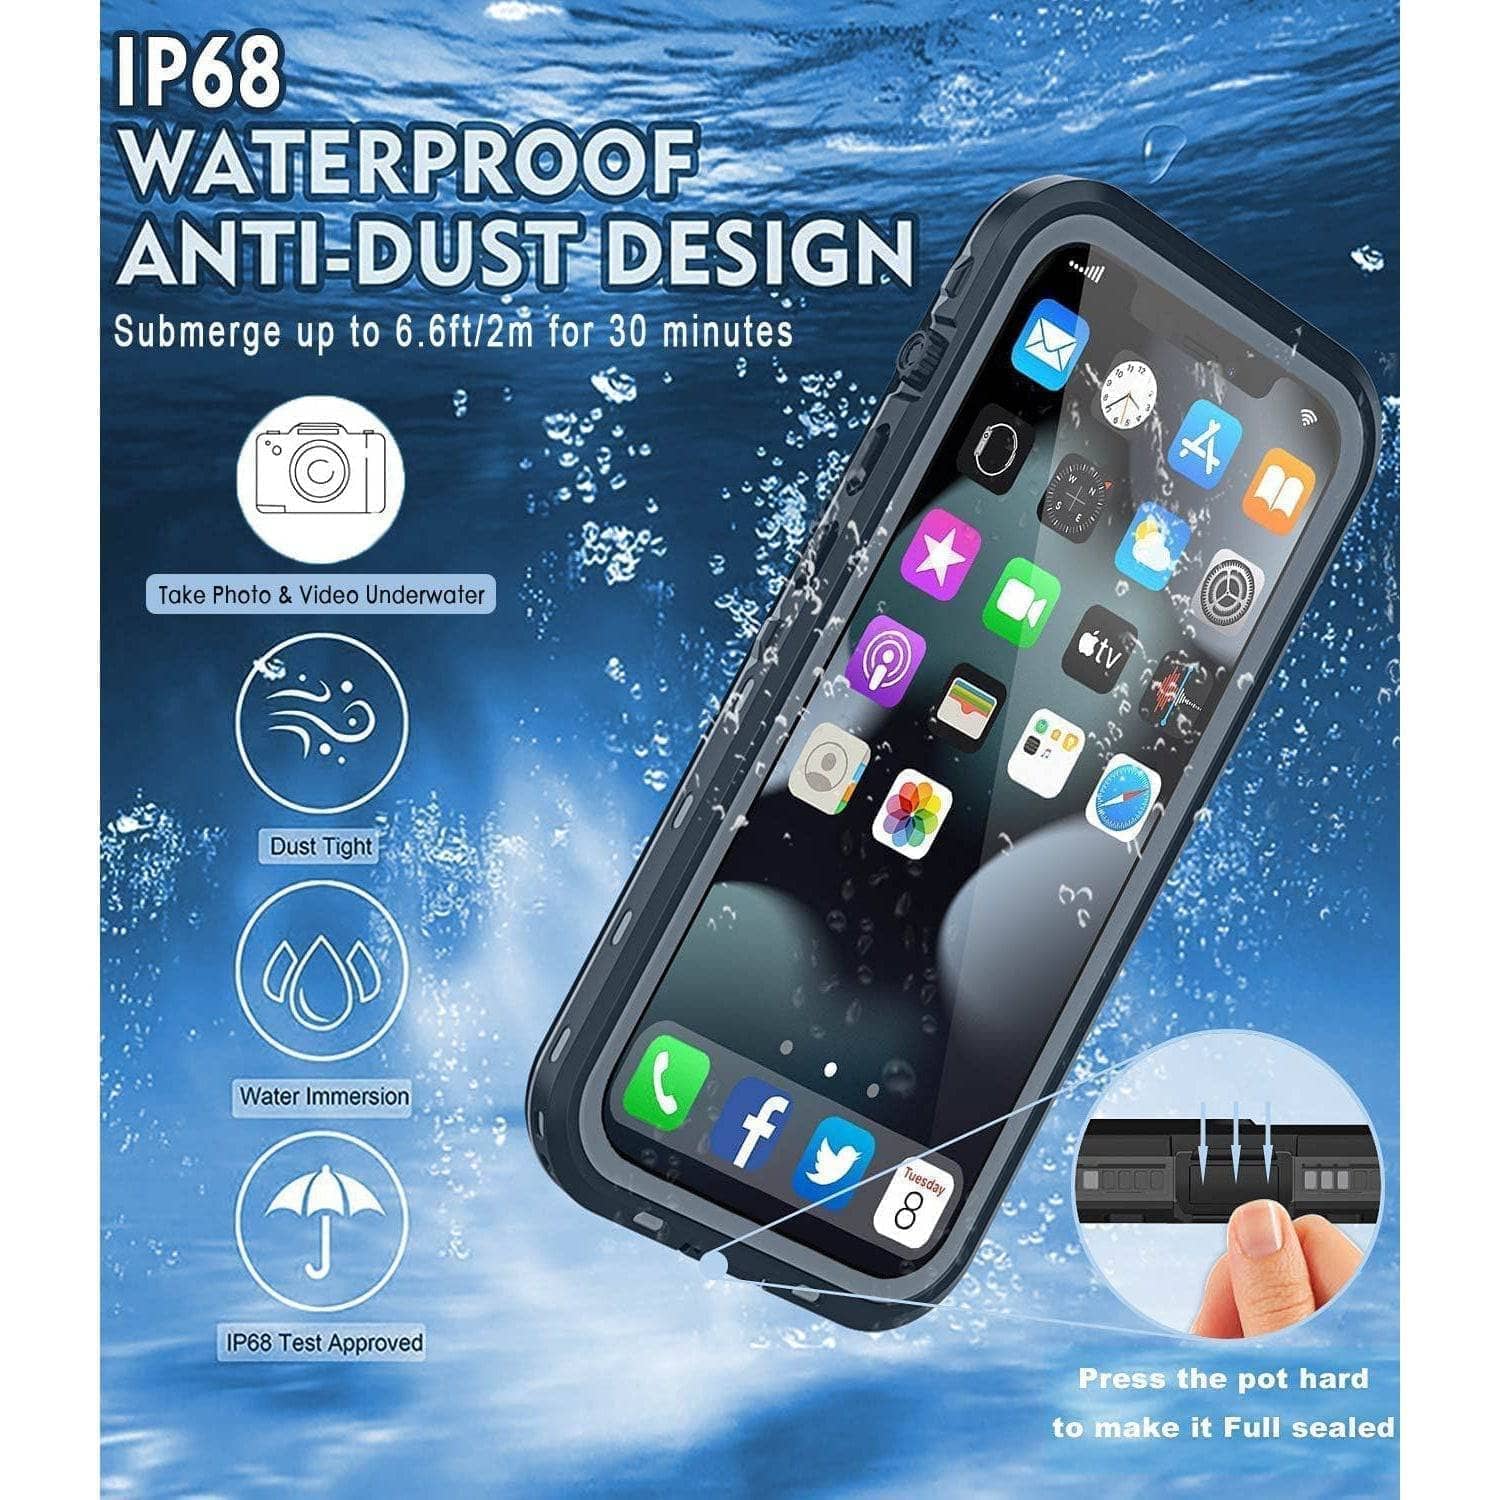 Blacktech WaterProof case for iPhone 14/ 14 Pro Max/13 Pro Max/13 Pro Shockproof-Phone Case-BLACKTECH-www.PhoneGuy.com.au